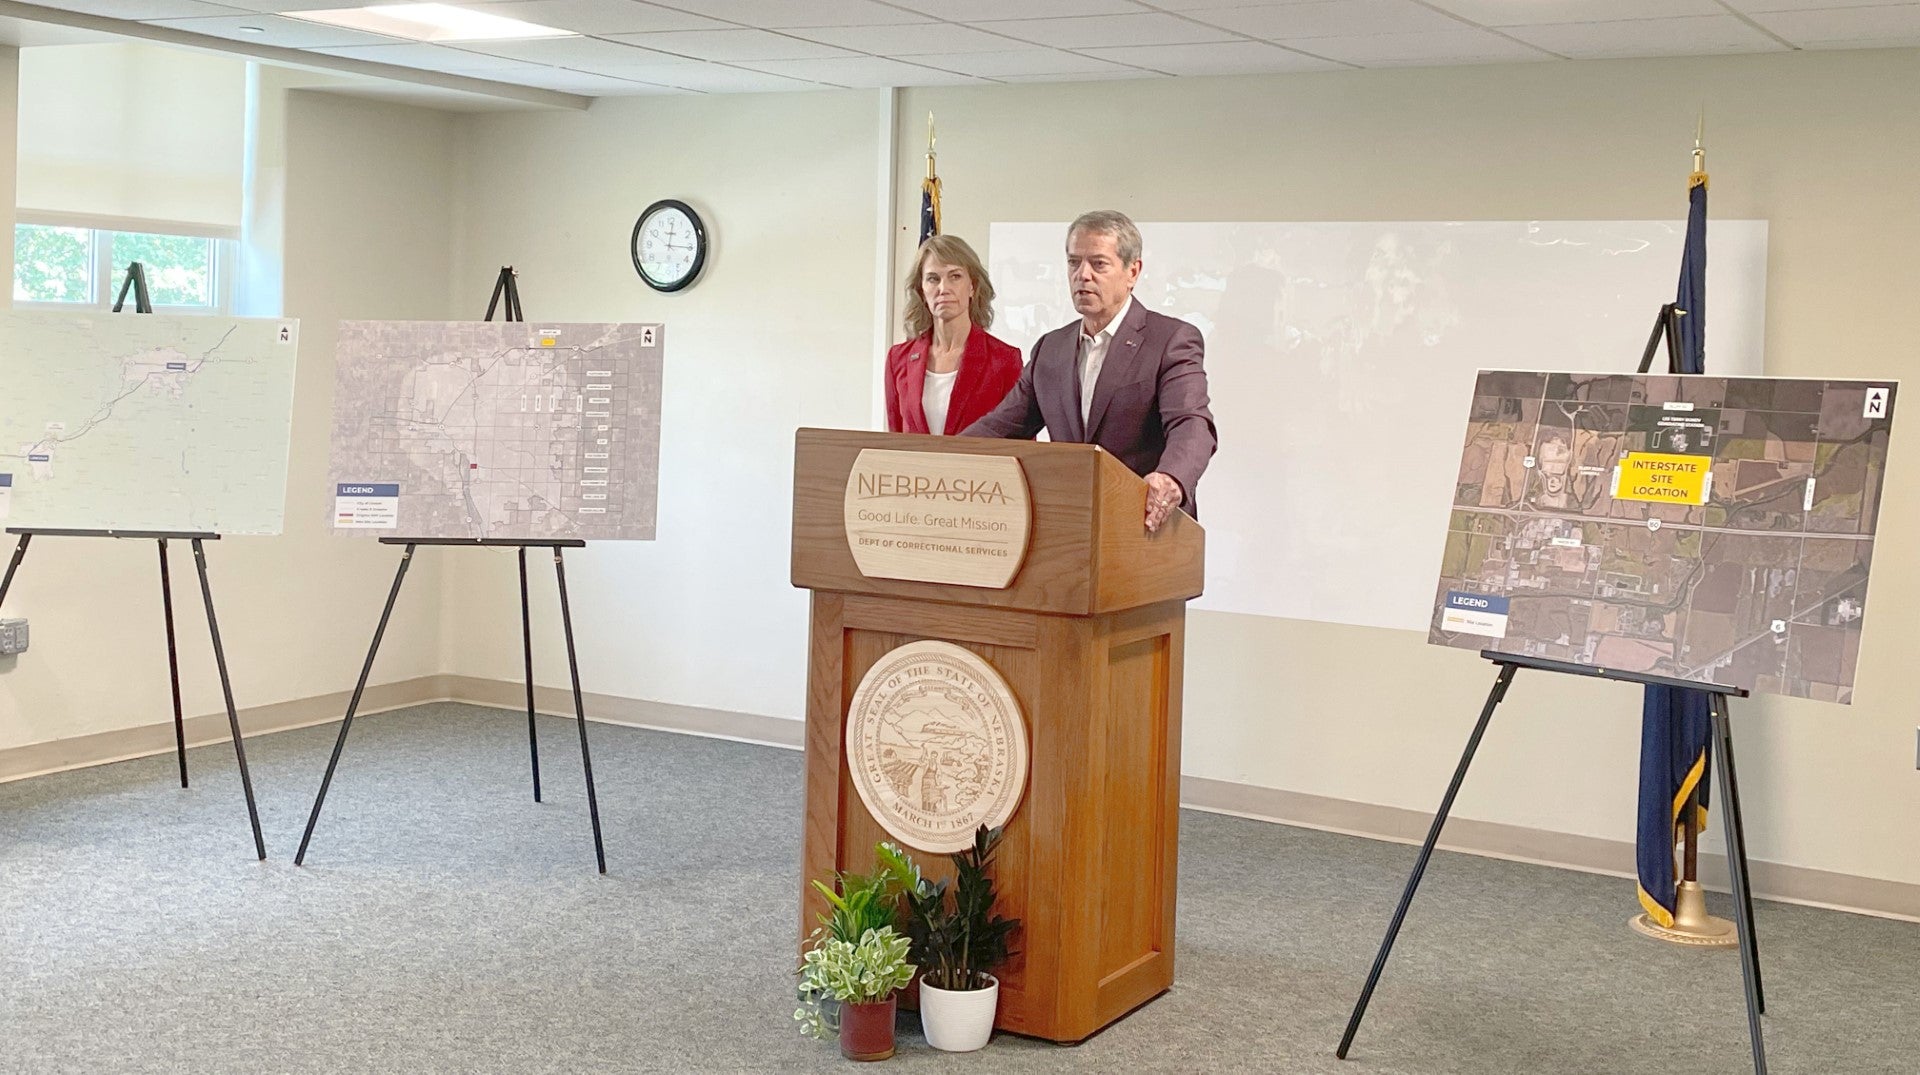 Governor Jim Pillen joined Lincoln Mayor Leirion Gaylor Baird in announcing the new agreed upon site for the state’s new 1,512-bed correctional facility.